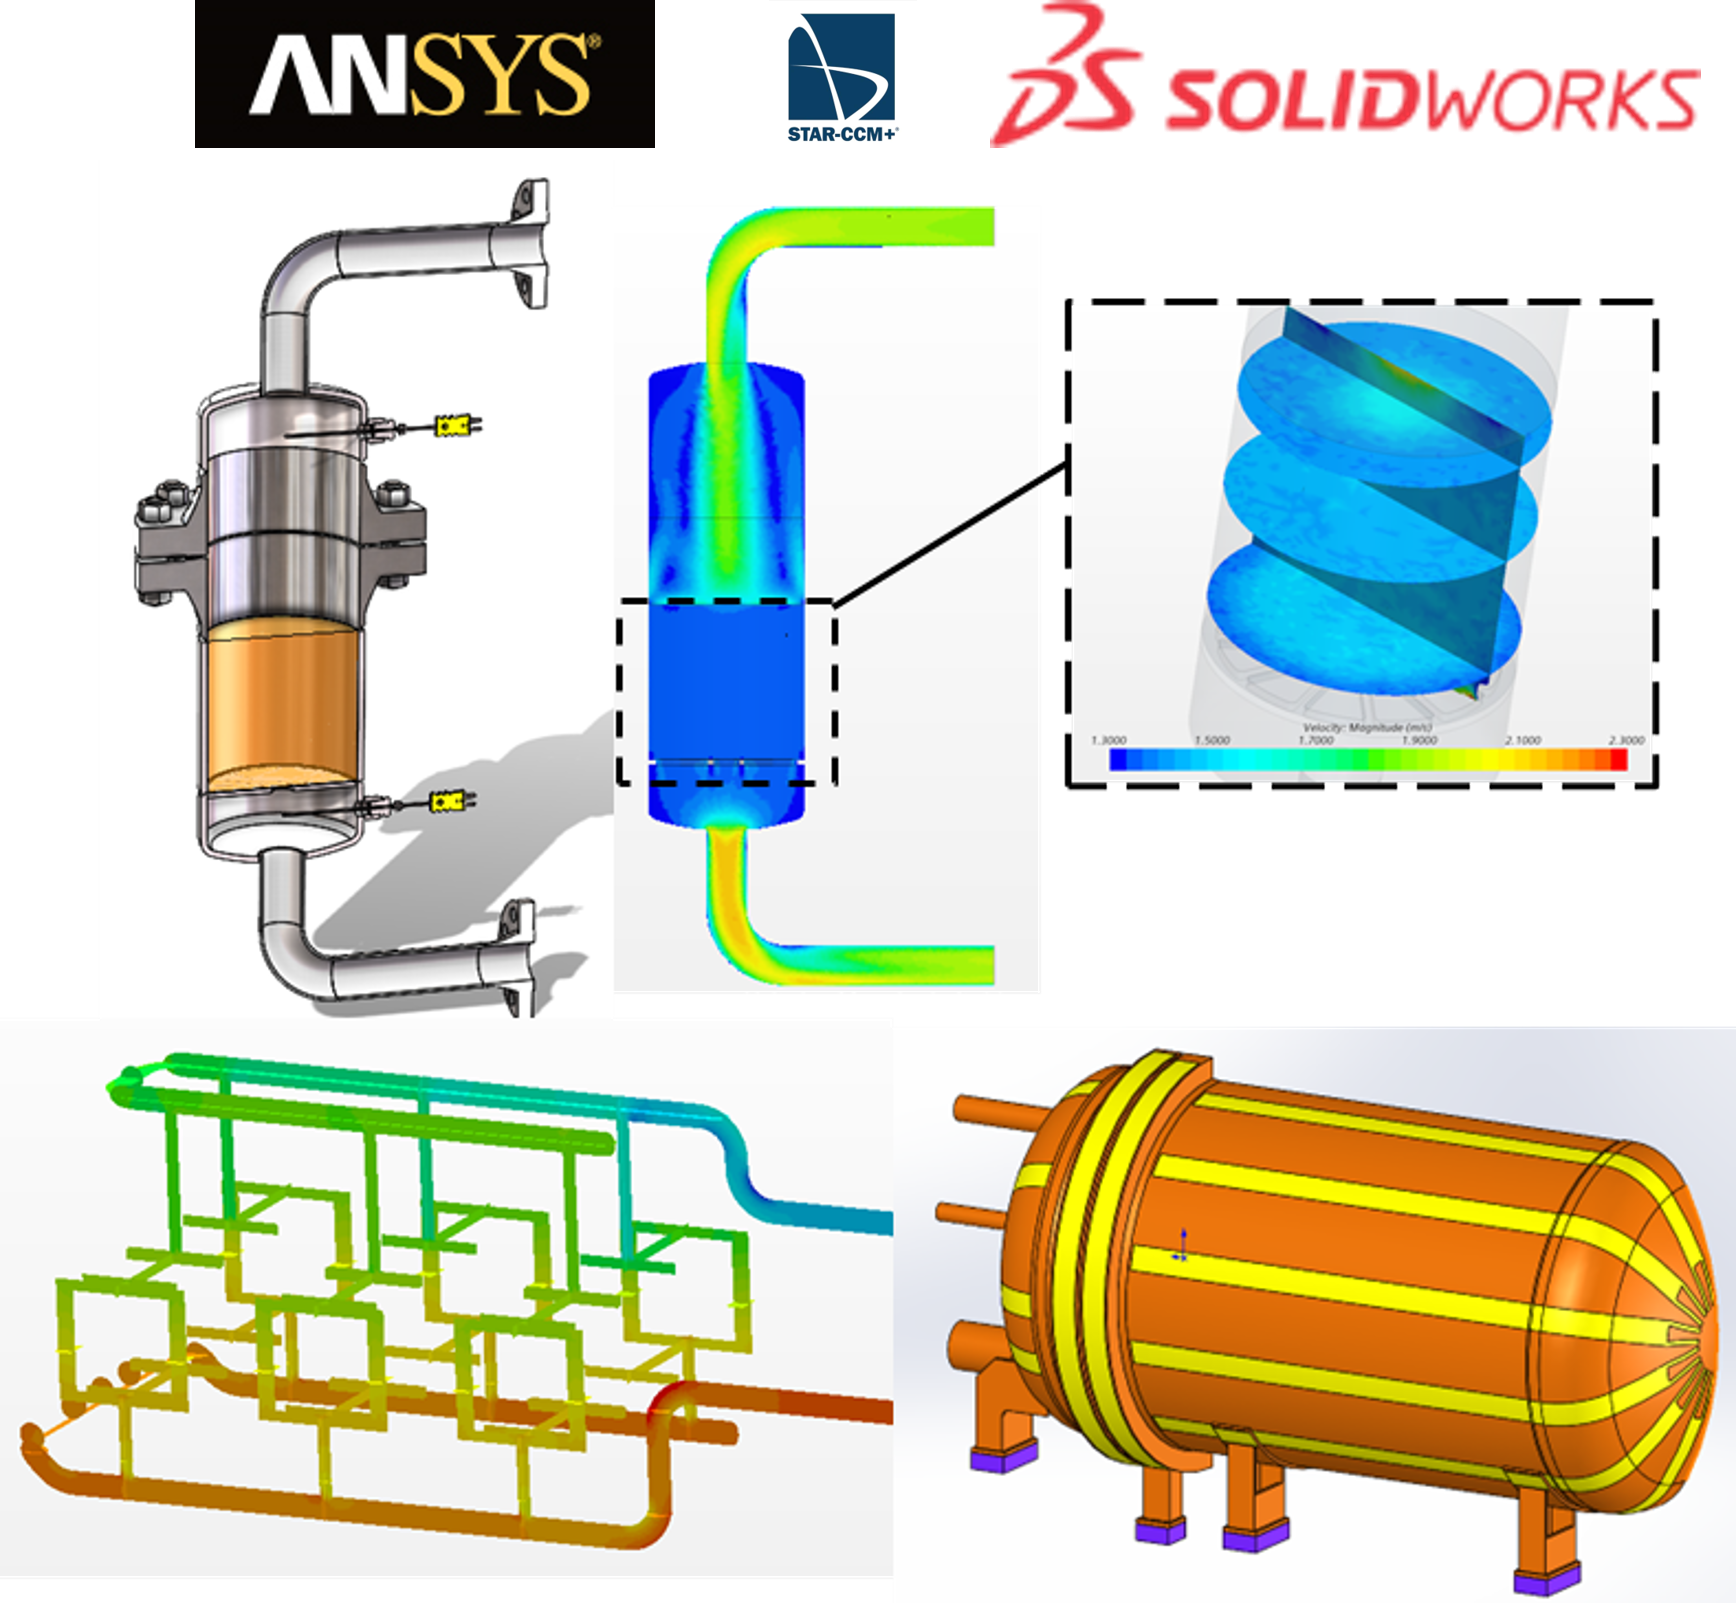 CFD and FEA used to support the design of various subsystems